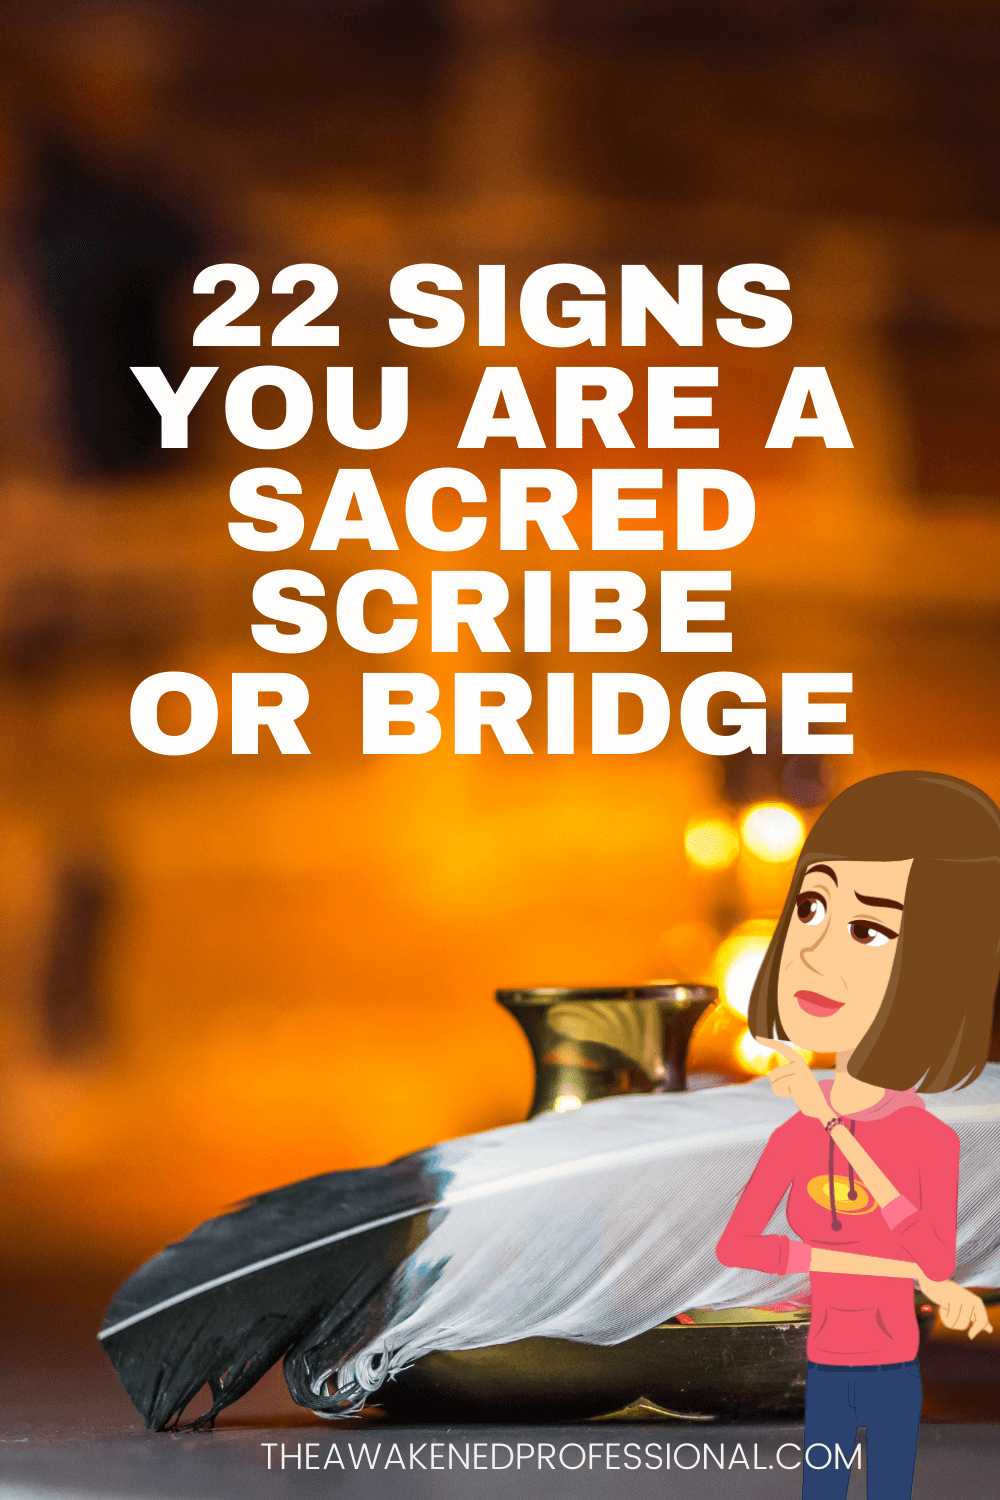 22 signs you are a sacred scribe